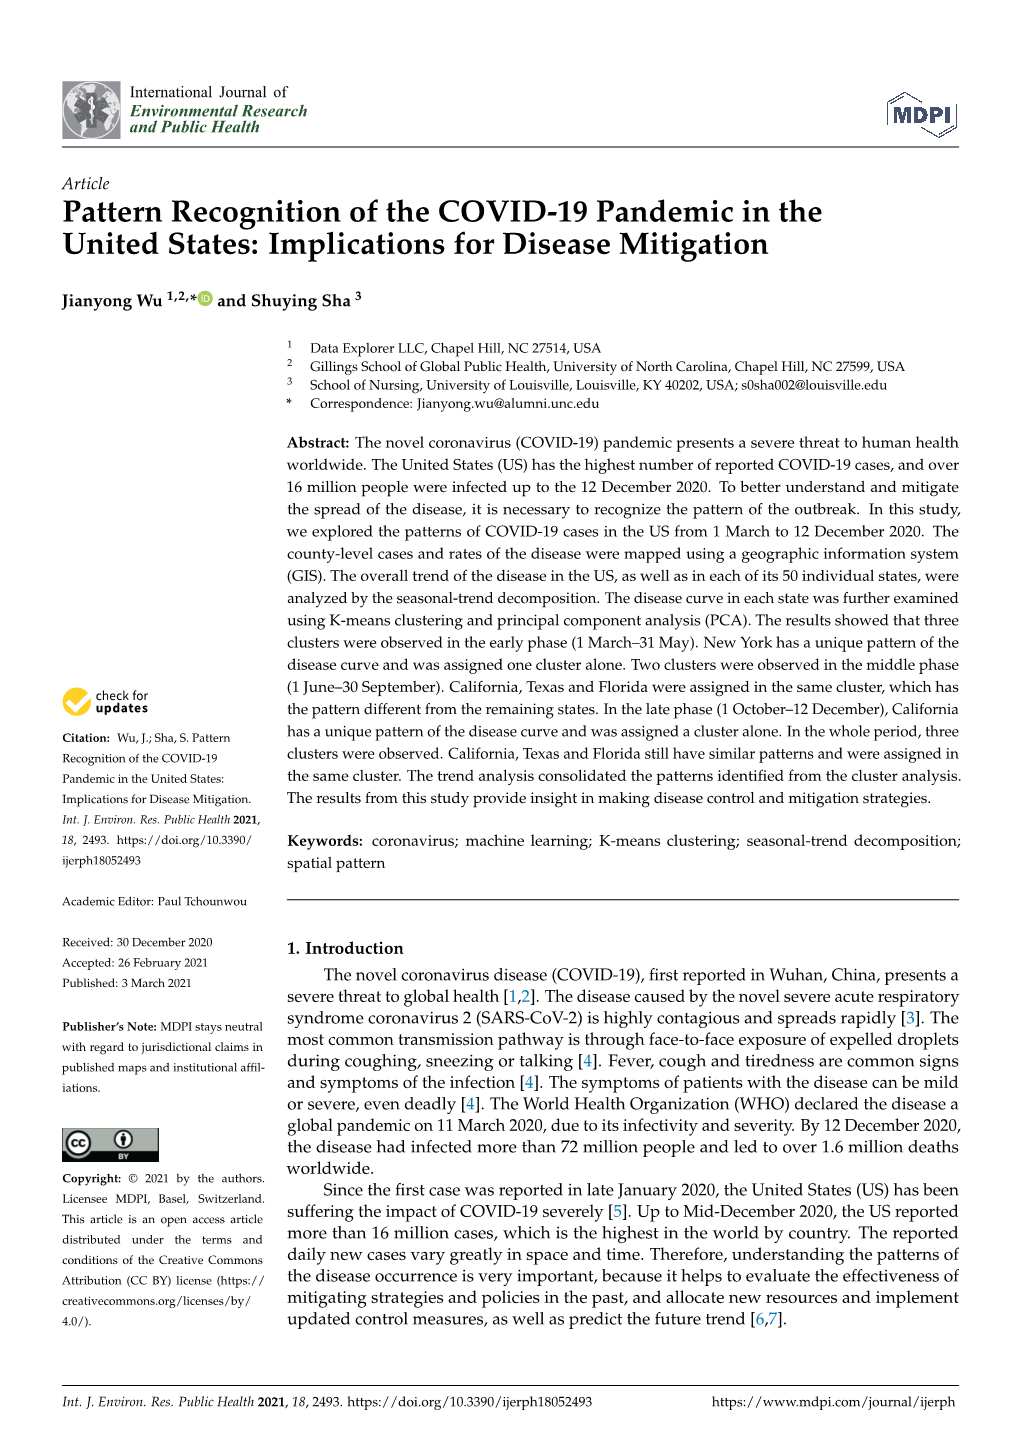 Pattern Recognition of the COVID-19 Pandemic in the United States: Implications for Disease Mitigation